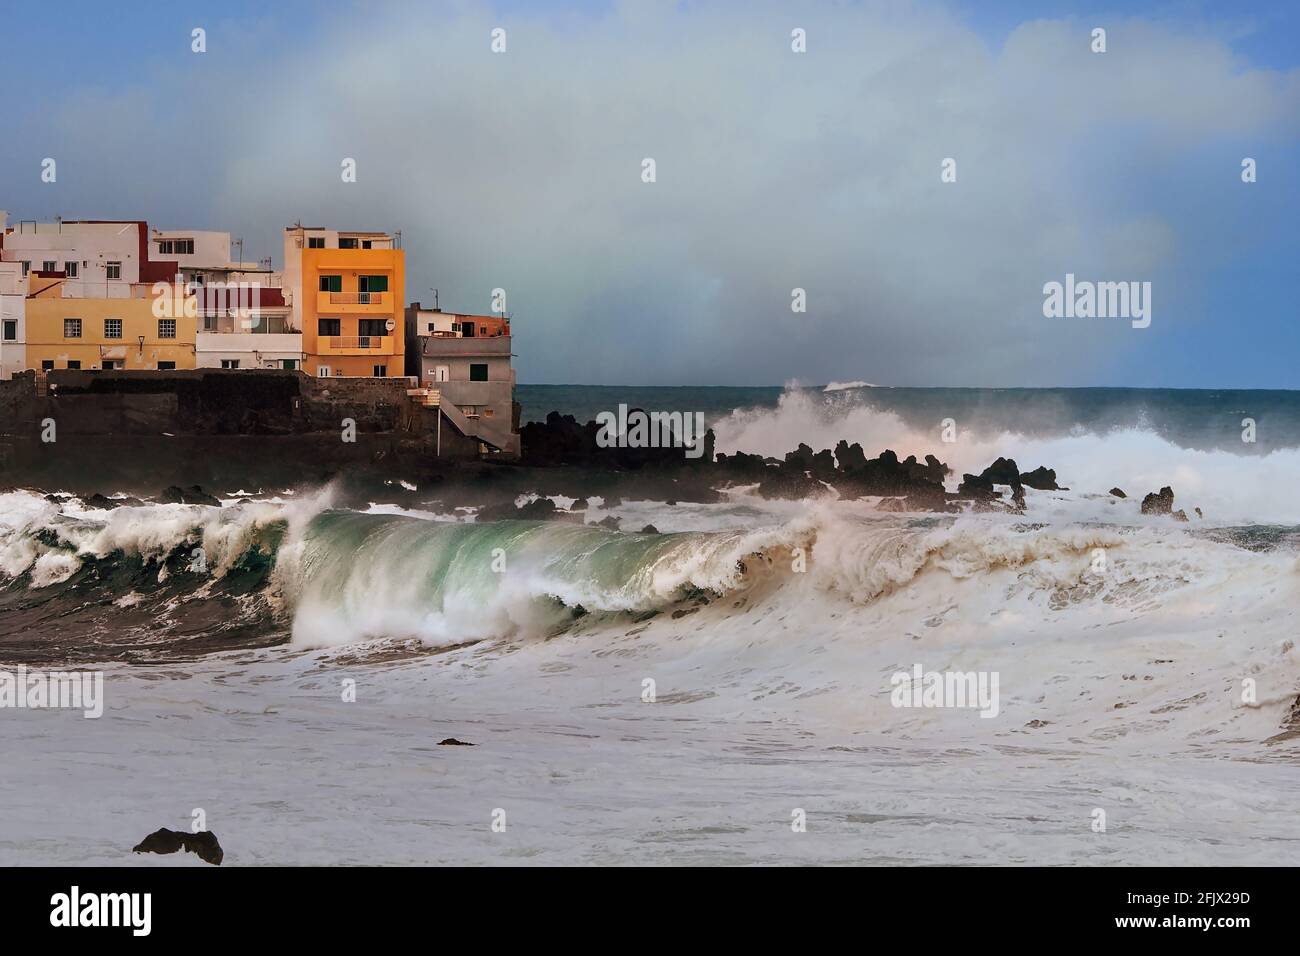 View of the tip of the old fishing village 'Punta Brava' on the north coast of the Canary Island Tenerife with high, rolling waves Stock Photo